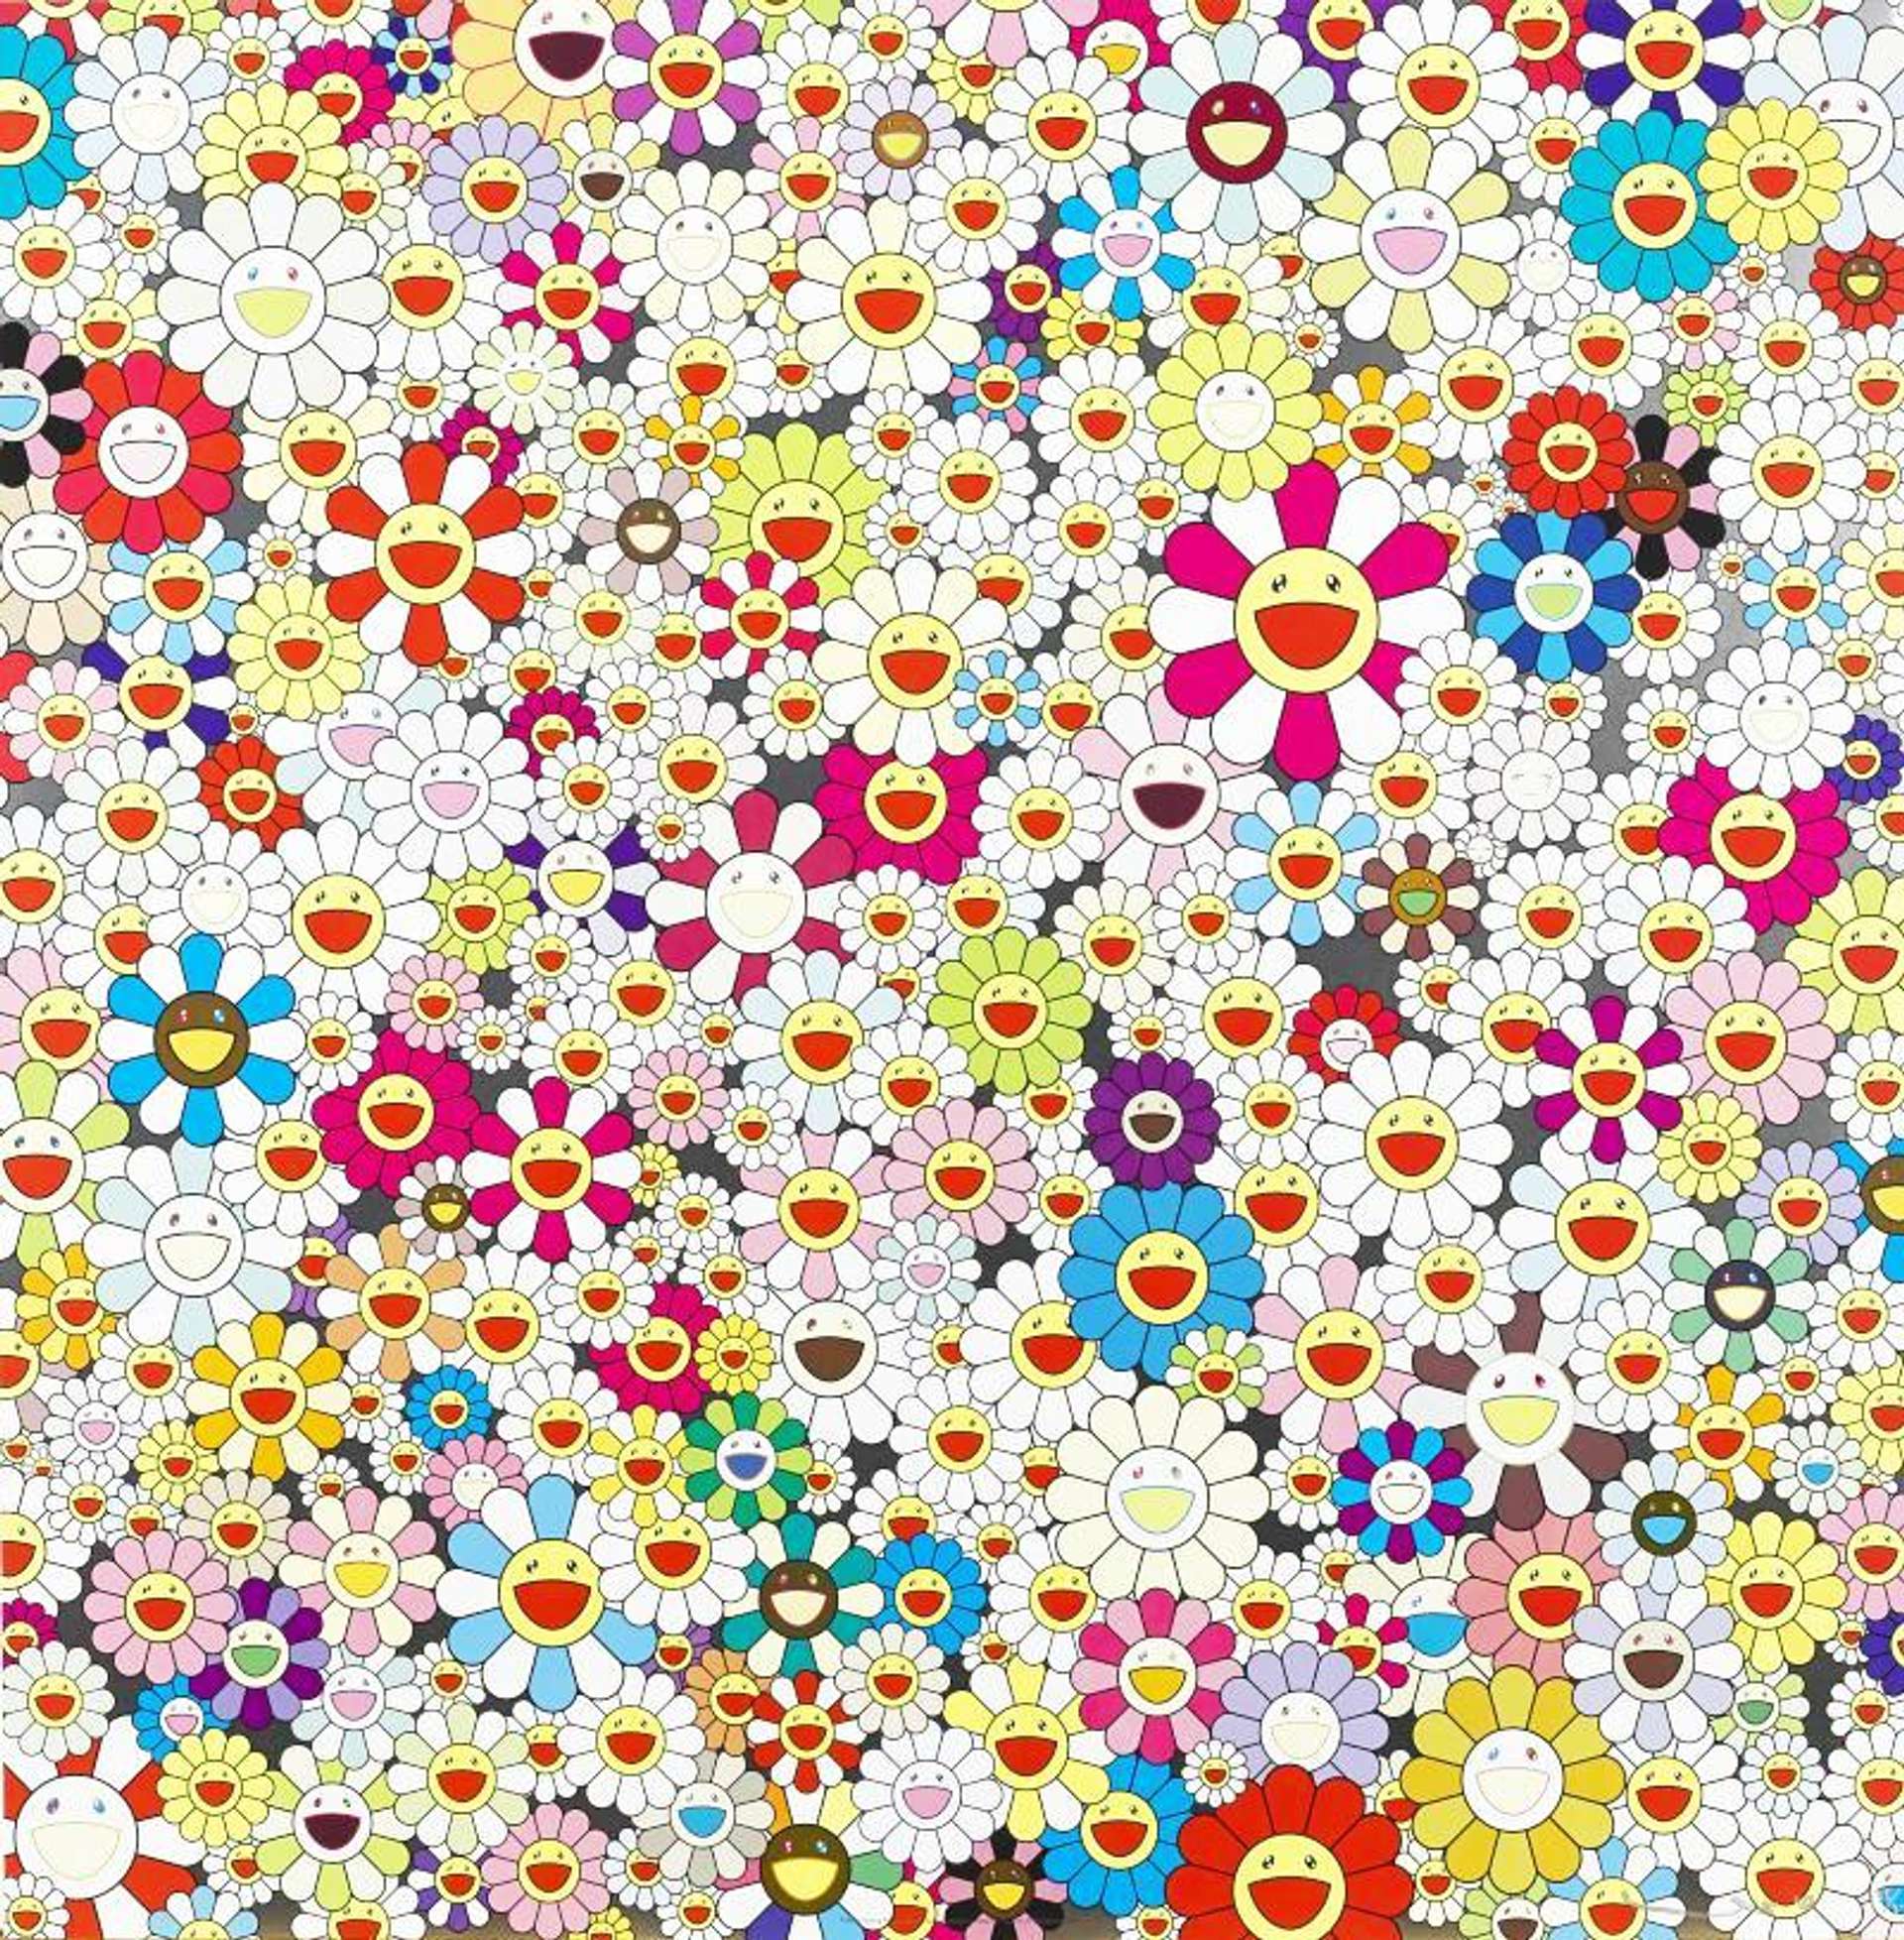 Hundreds of cartoonish flowers, with cheery smiling faces, are organised across the composition. All of these flowers are executed in different sizes and bright, block colours.